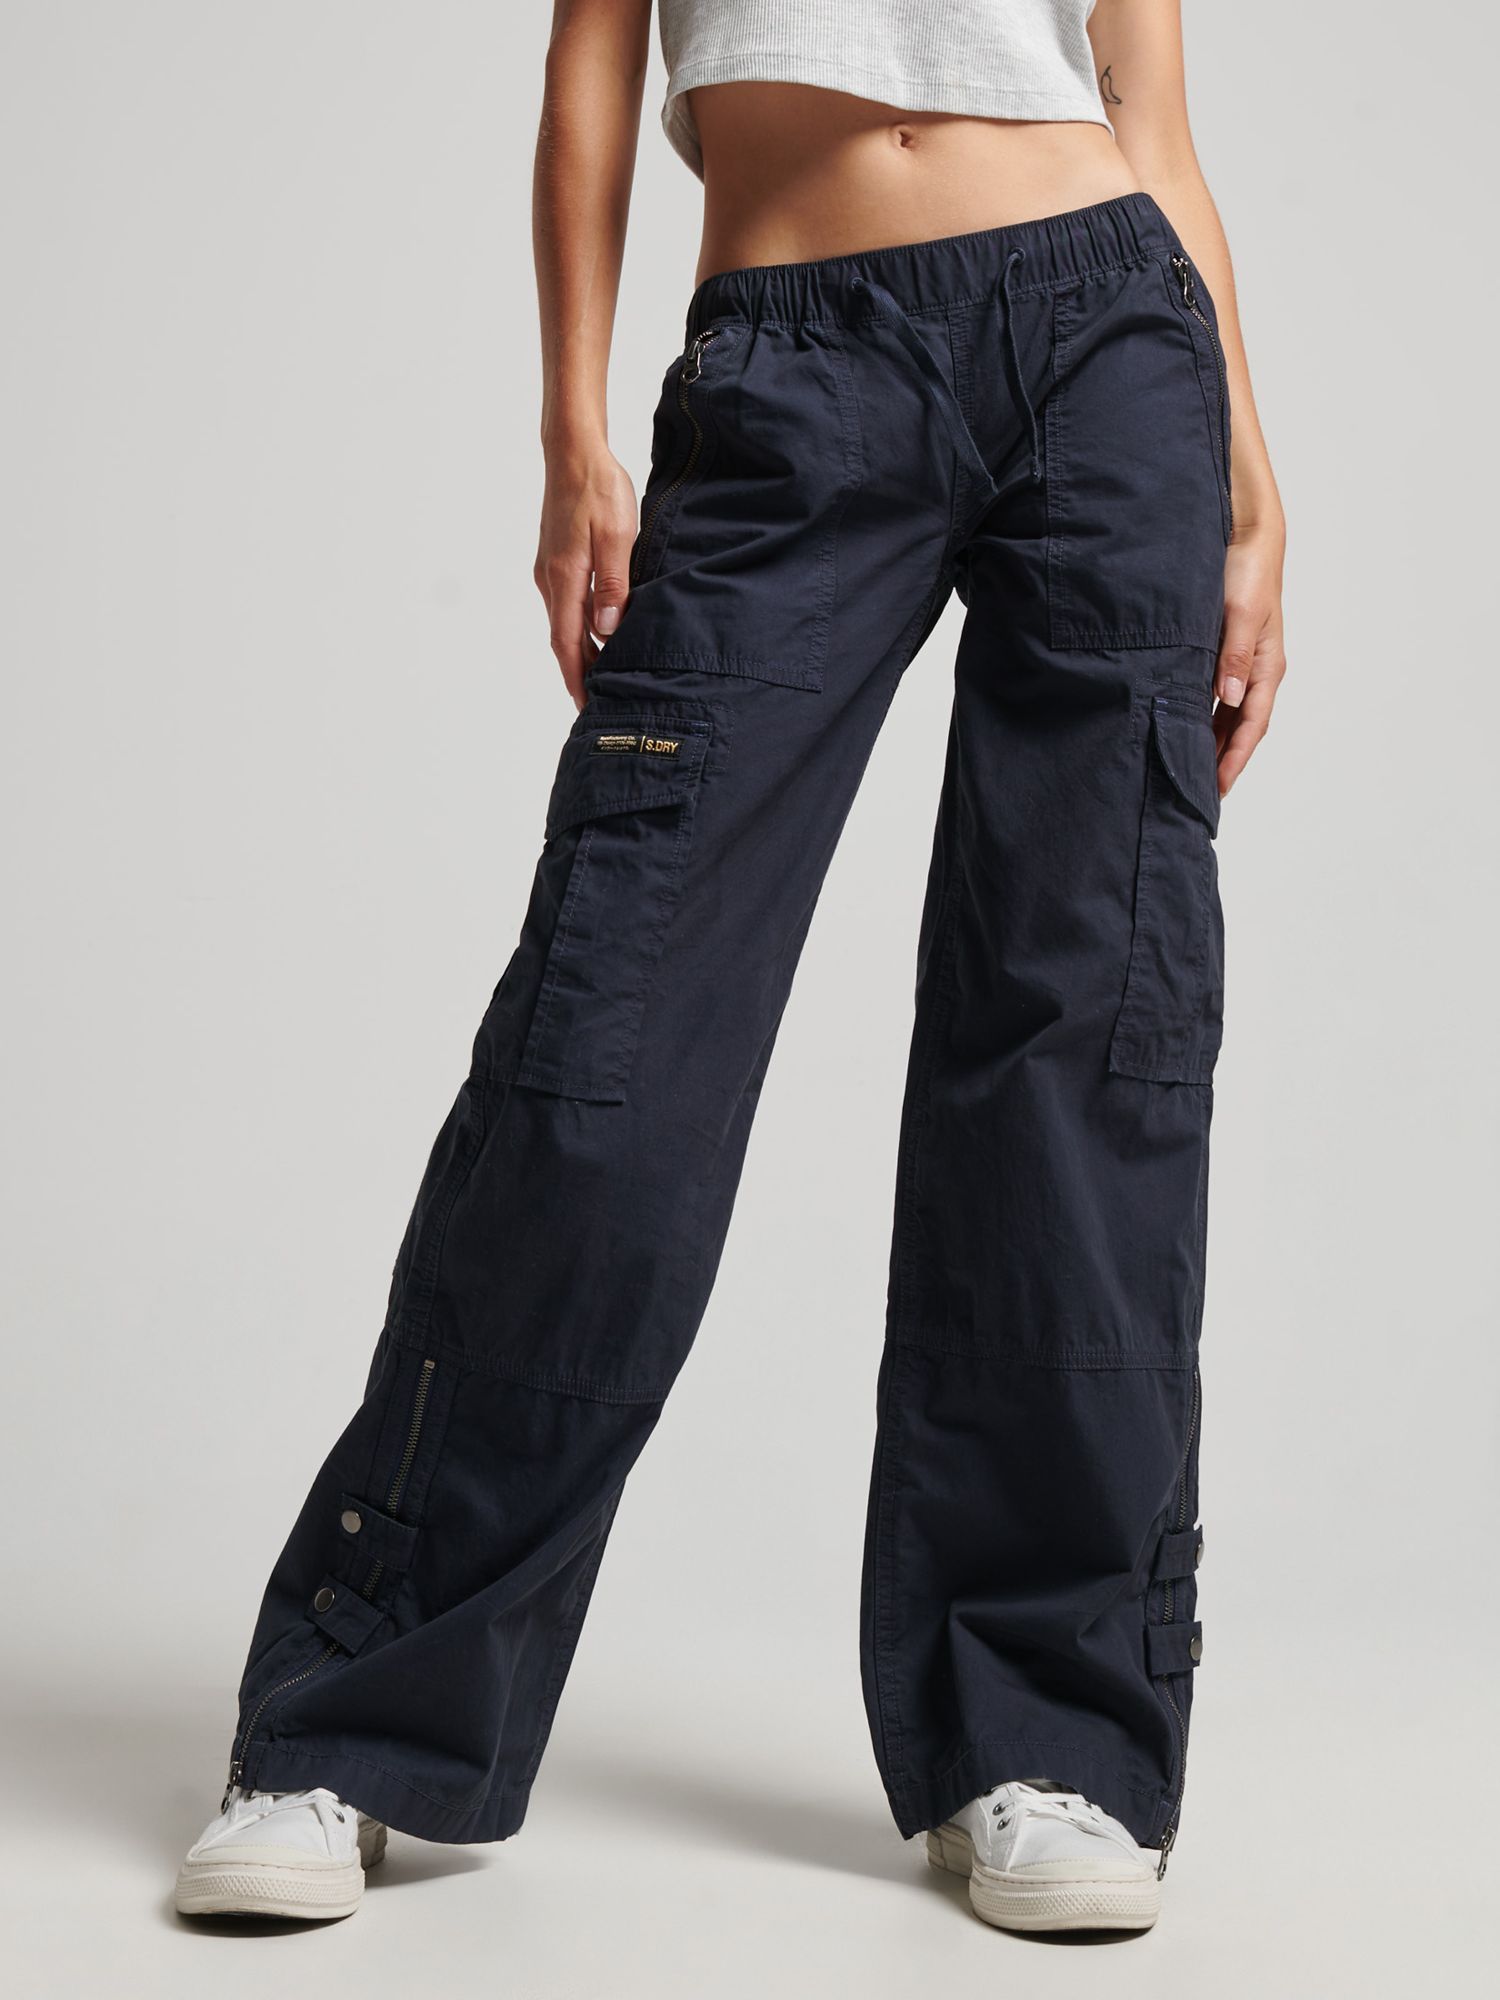 Superdry Core Cotton Blend Cargo Trousers at John Lewis & Partners